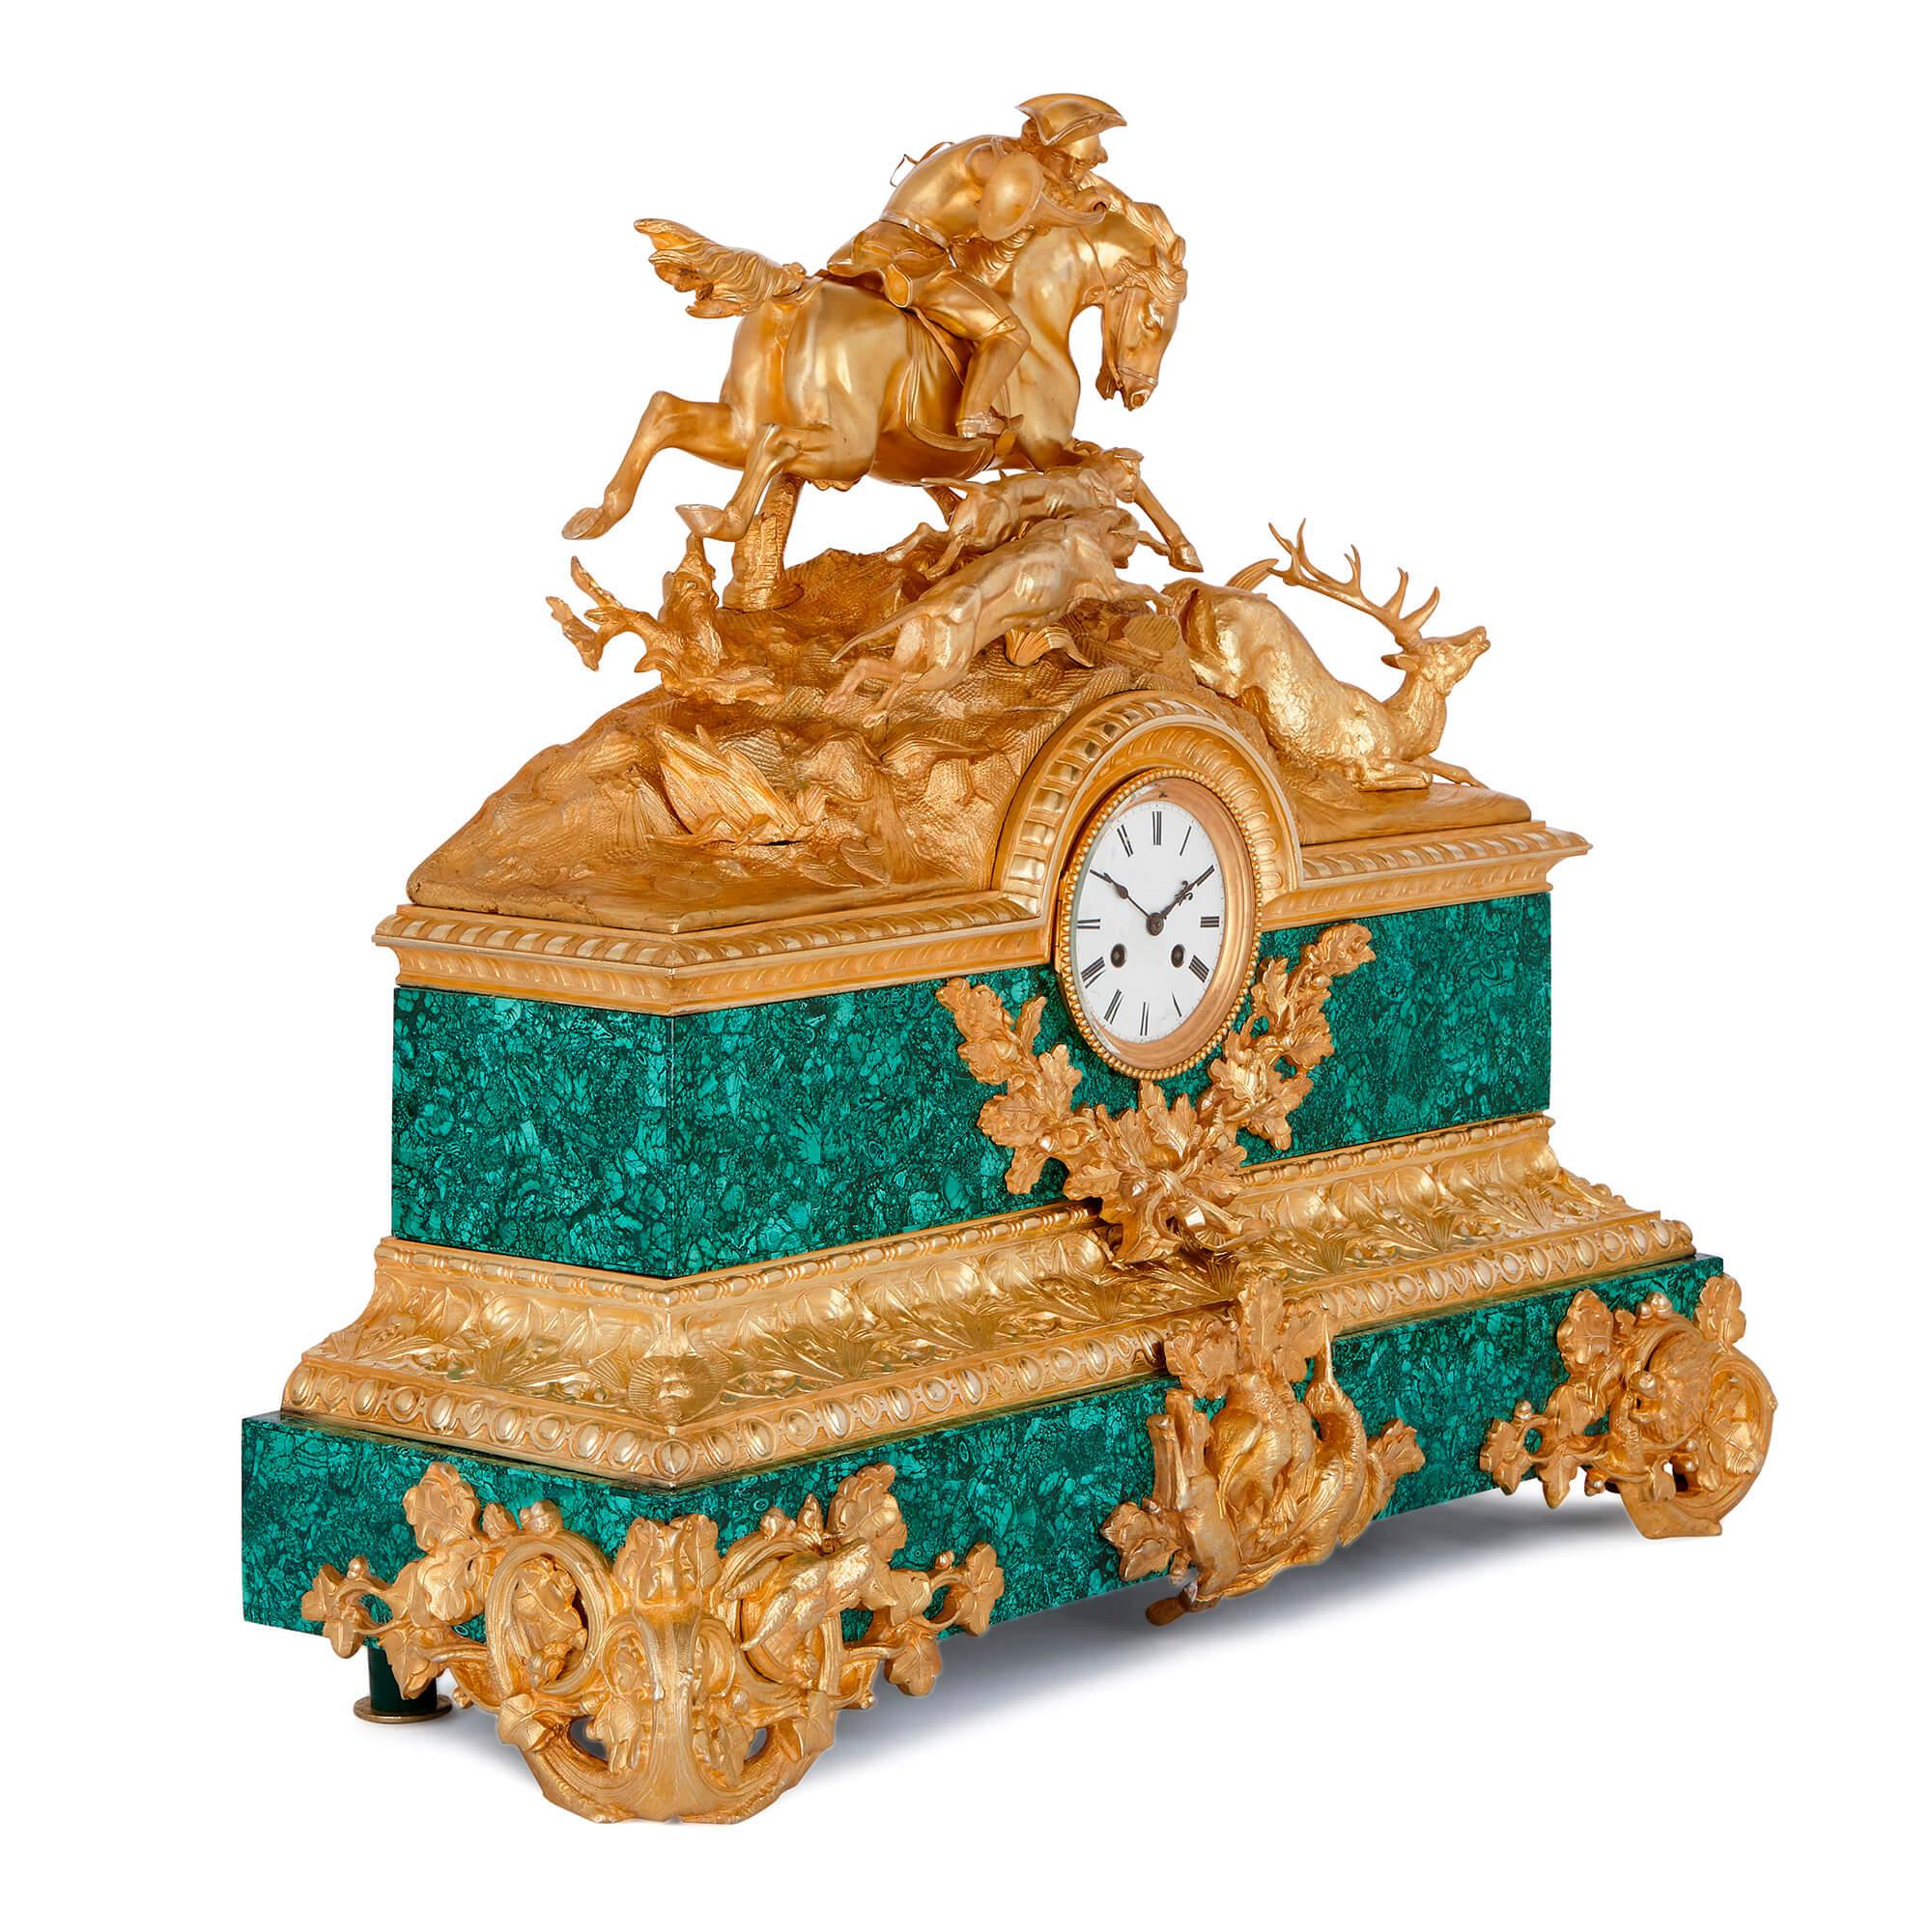 This exceptional gilt bronze mantel clock is finely-cast and elegantly veneered in malachite, and is especially notable for the excellently-sculpted hunting scene which adorns the upper part of the clock case.

The hunting scene shows a man with a